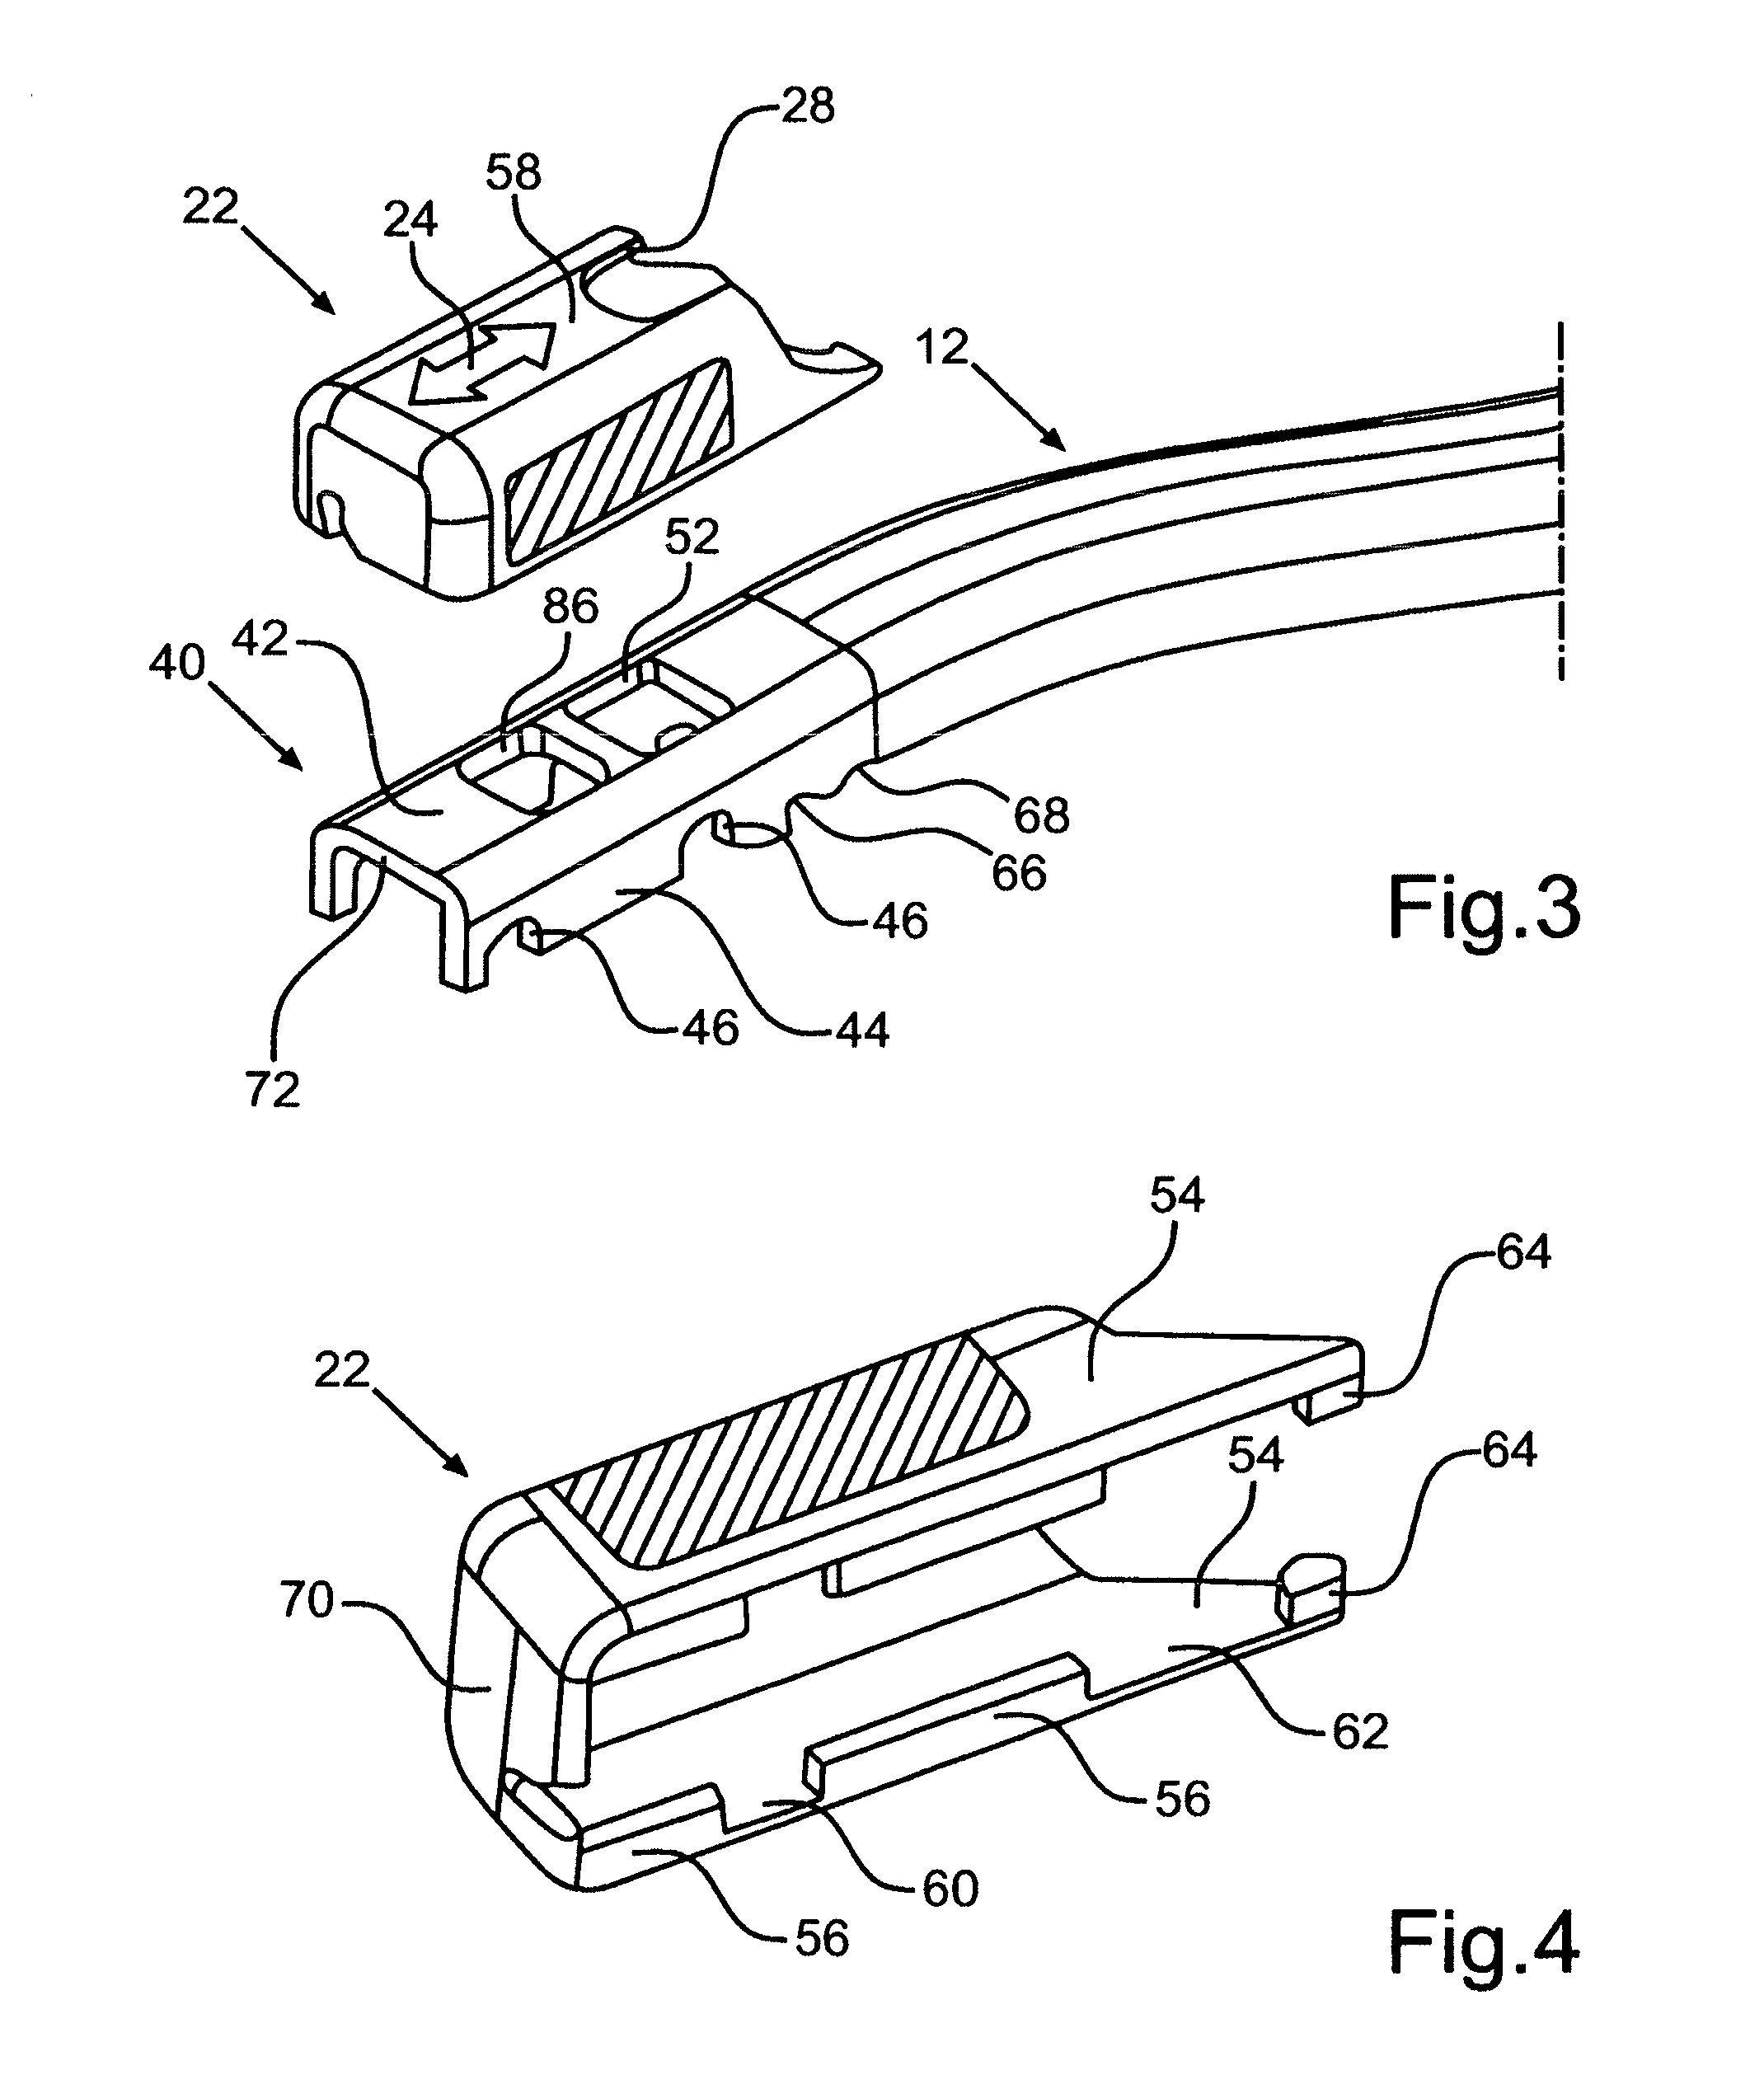 Connecting Arrangement and Method for Connecting a Wiper Blade to a Wiper Arm for a Windscreen Wiper System of a Vehicle